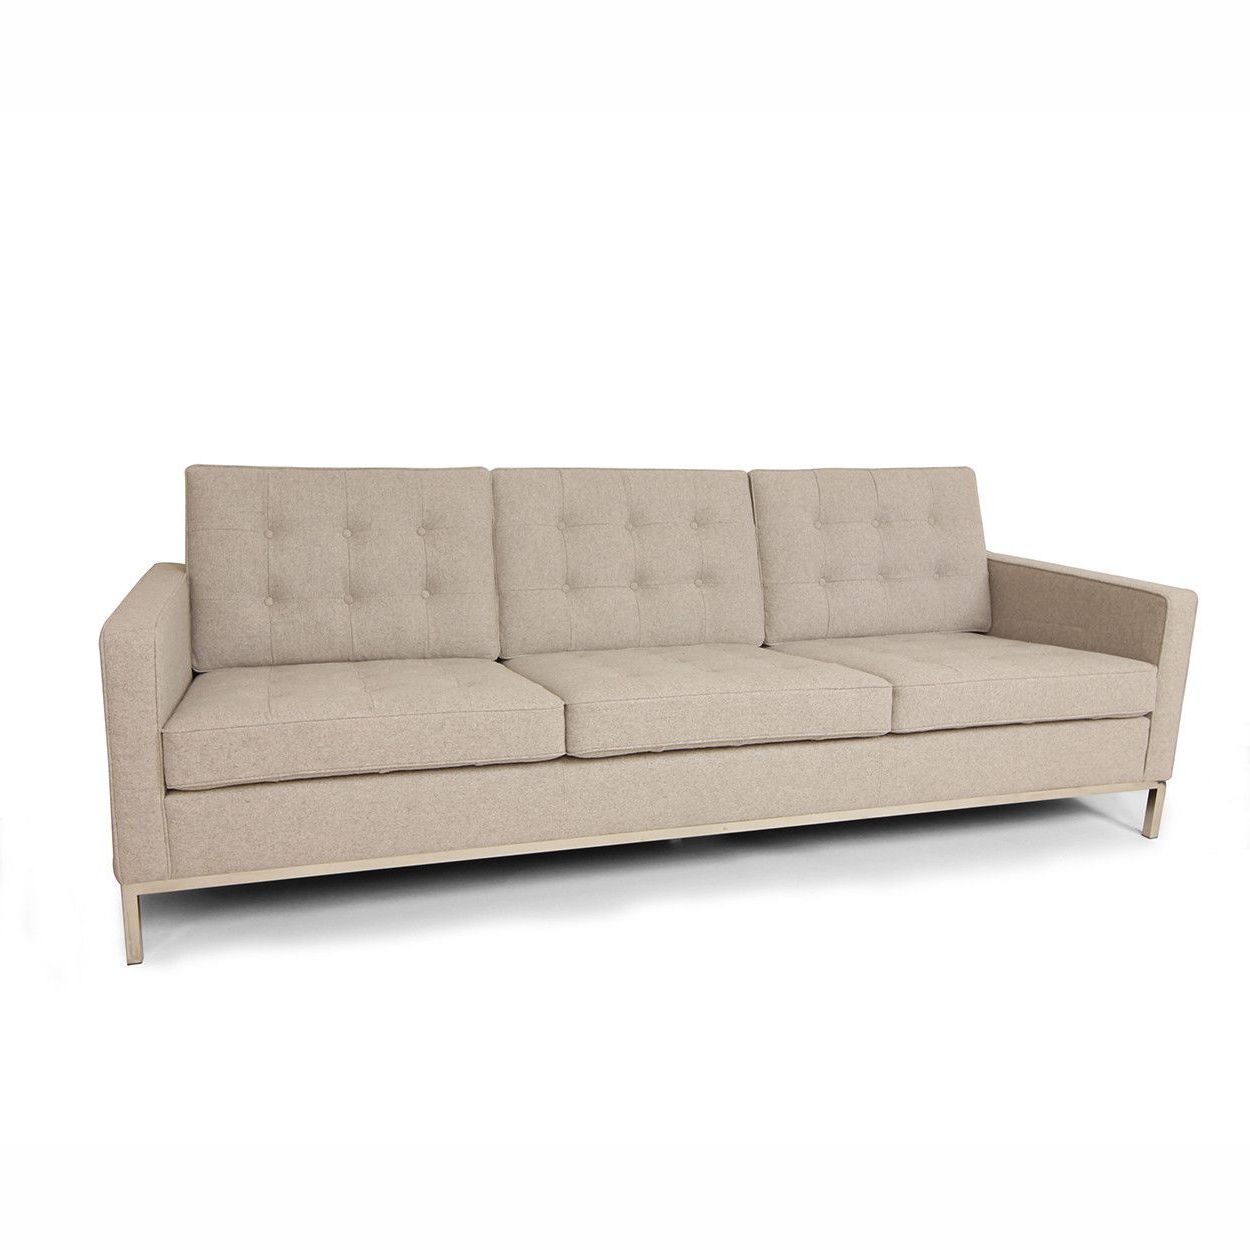 Well Liked $1799 Mid Century Modern Reproduction Tufted Sofa – Wool Inside Florence Mid Century Modern Left Sectional Sofas (View 23 of 25)